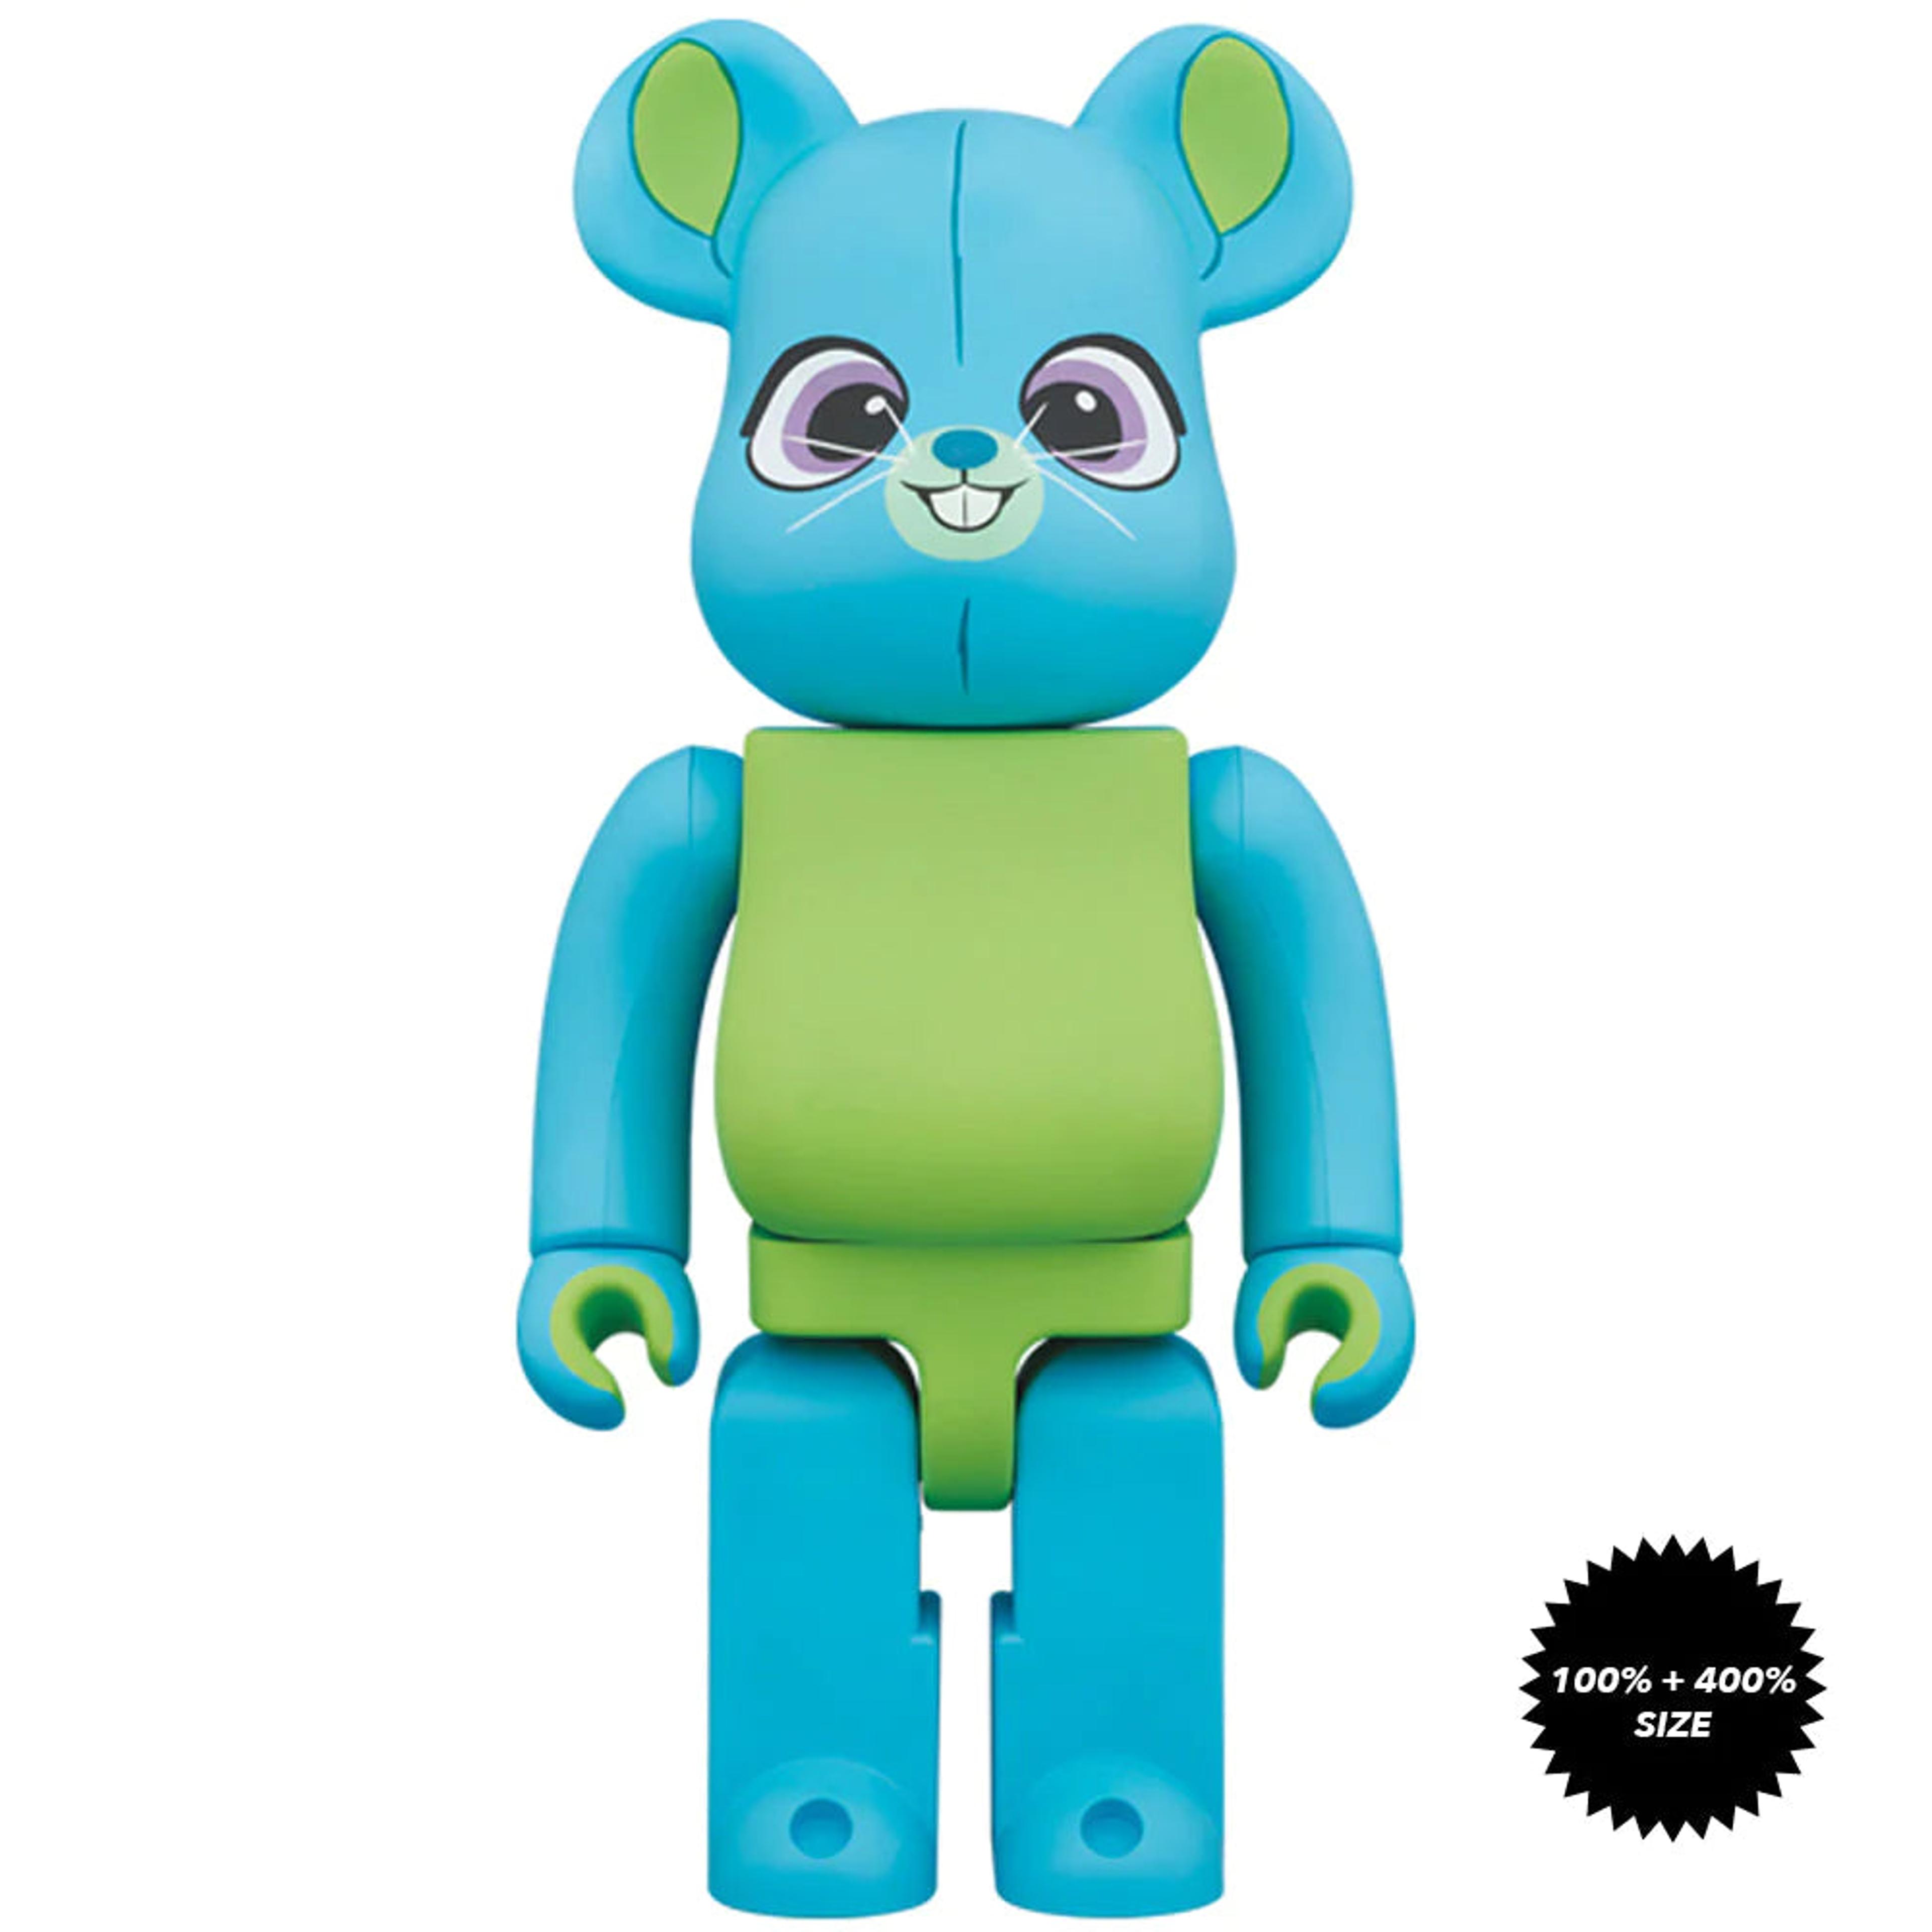 Alternate View 2 of BE@RBRICK TOY STORY BUNNY 400％ + 100%